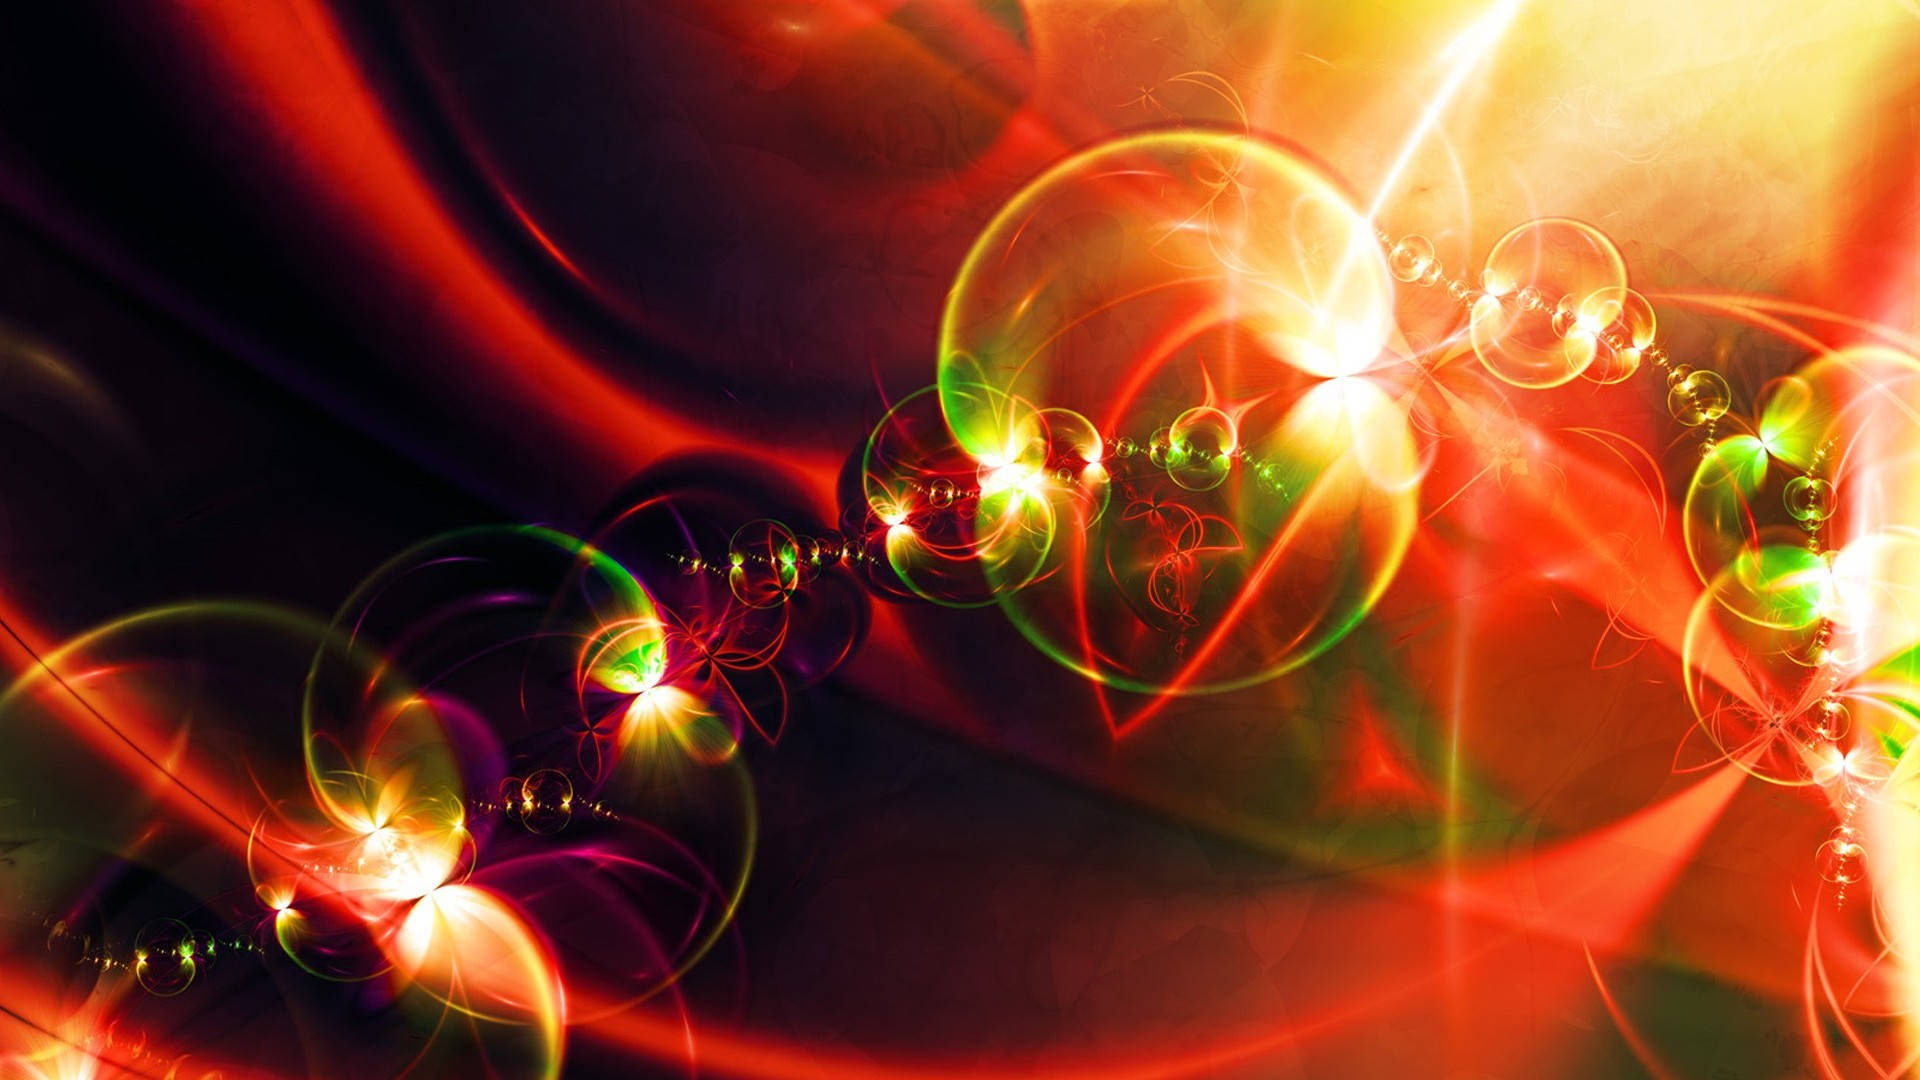 High Res Colorful Lens Flare Wallpaper